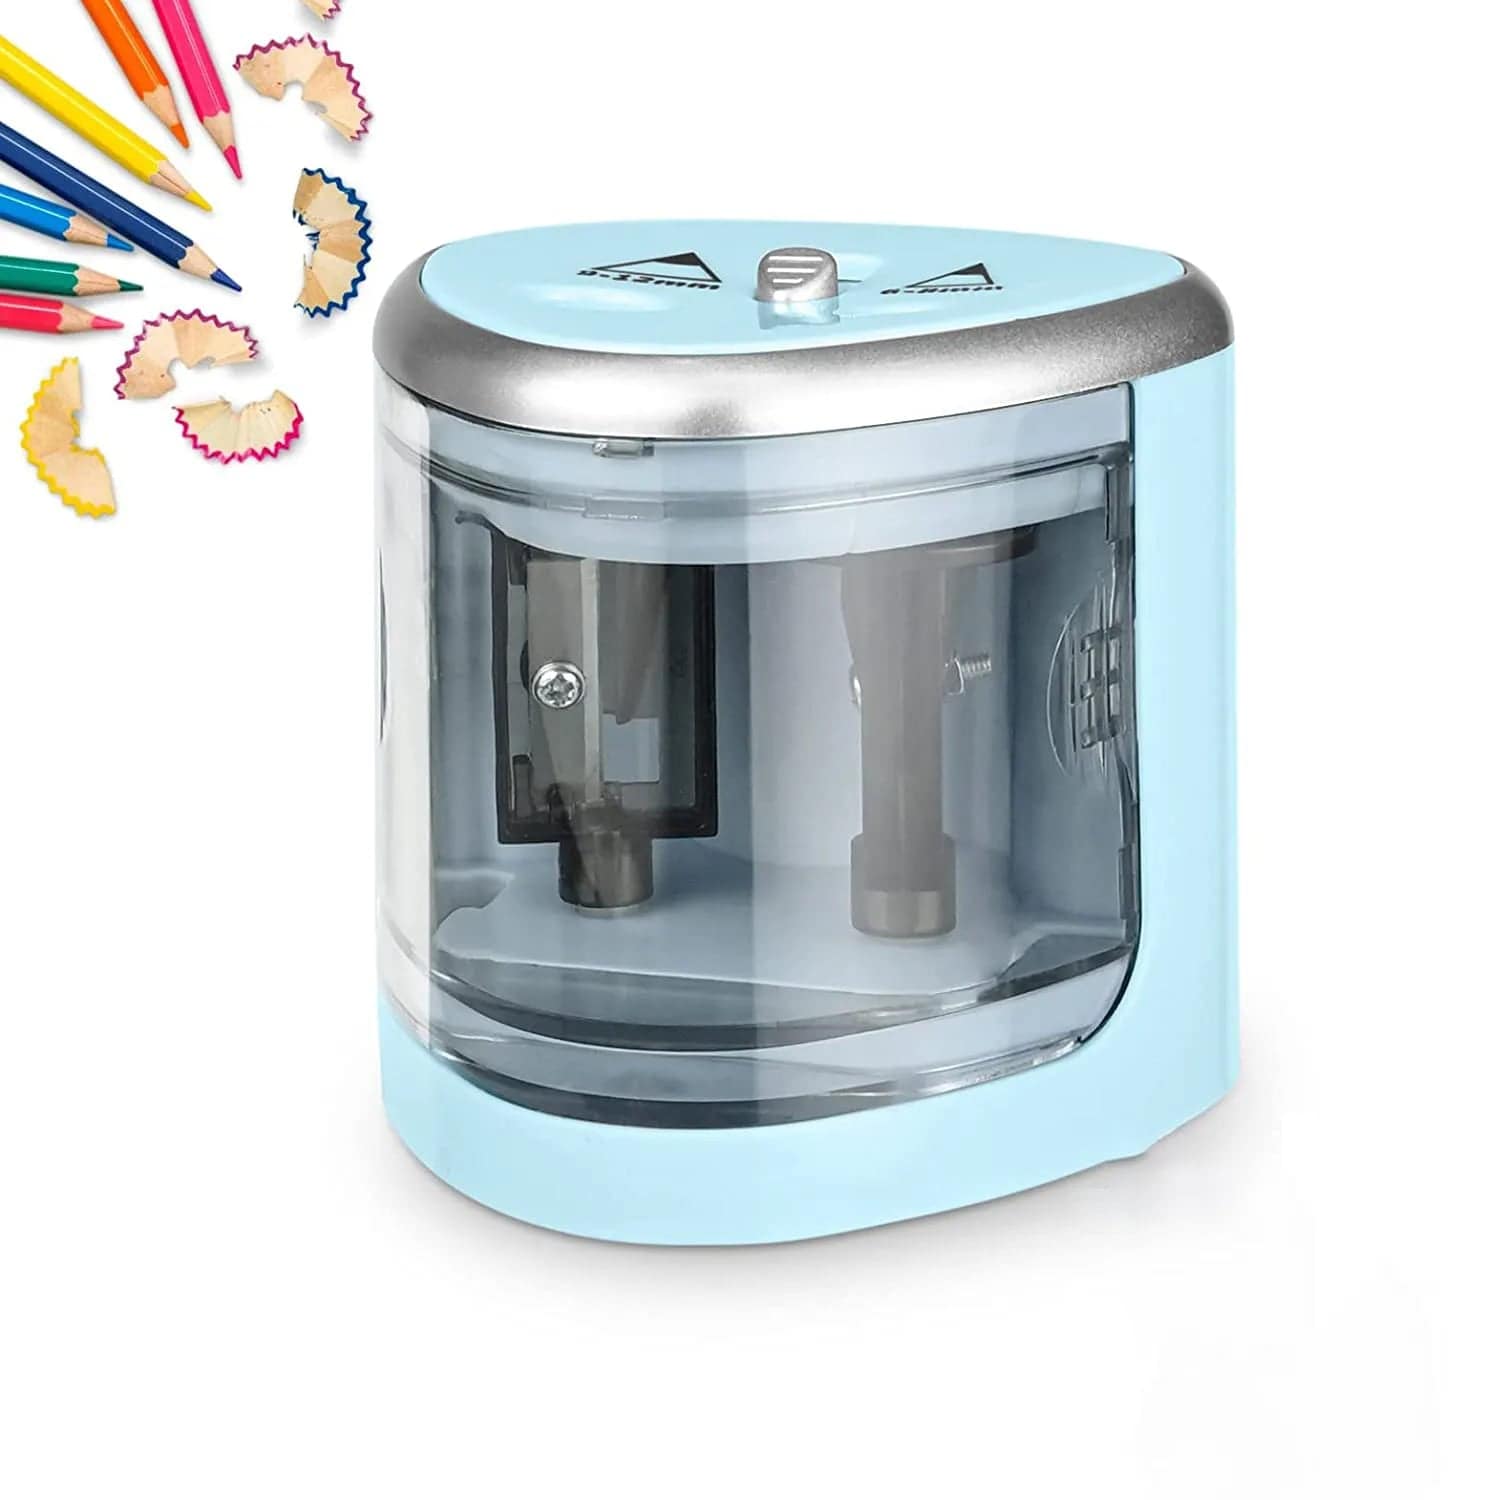 Two-hole Electric Pencil Sharpener Blue - IHavePaws